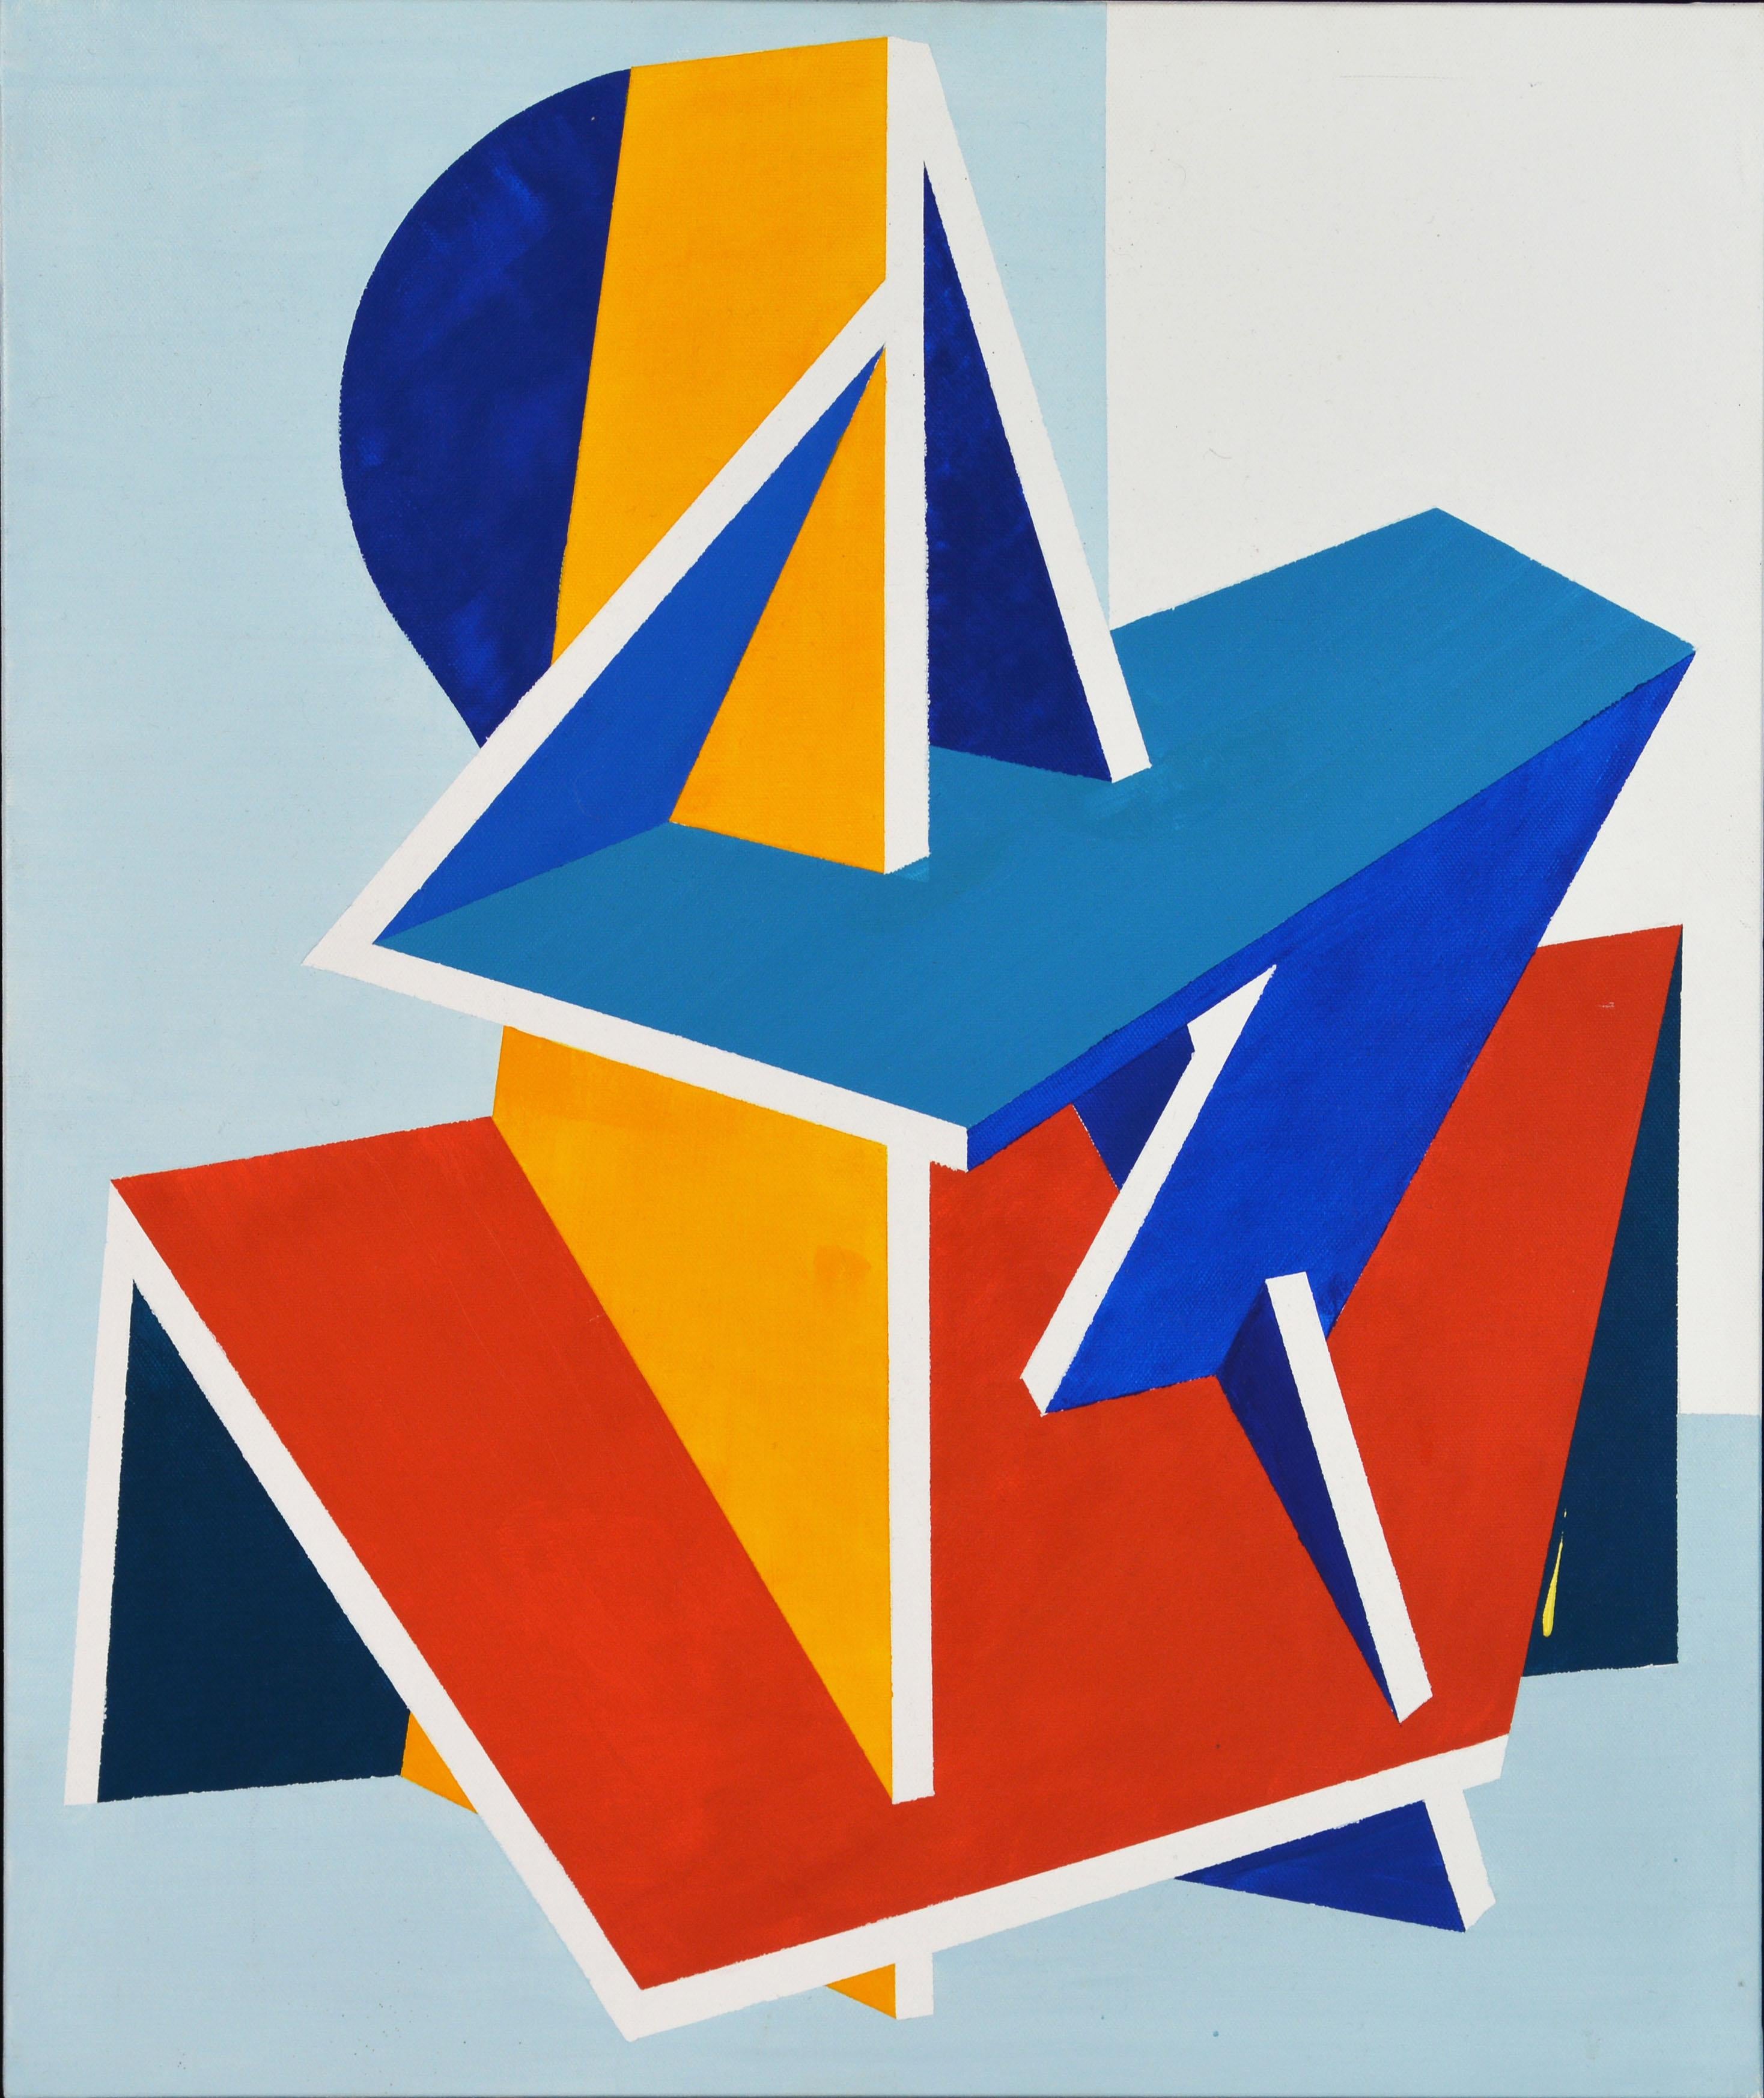 'Color Composition'
by Anders Hegelund, Danish b. 1938.
Acrylic on canvas. Measures: 23.5 x 19.5 in. without frame, 25.25 x 21.25 in. including frame, signed, dated and titled on the back.
Housed in a Minimalist style worn silver finish floater